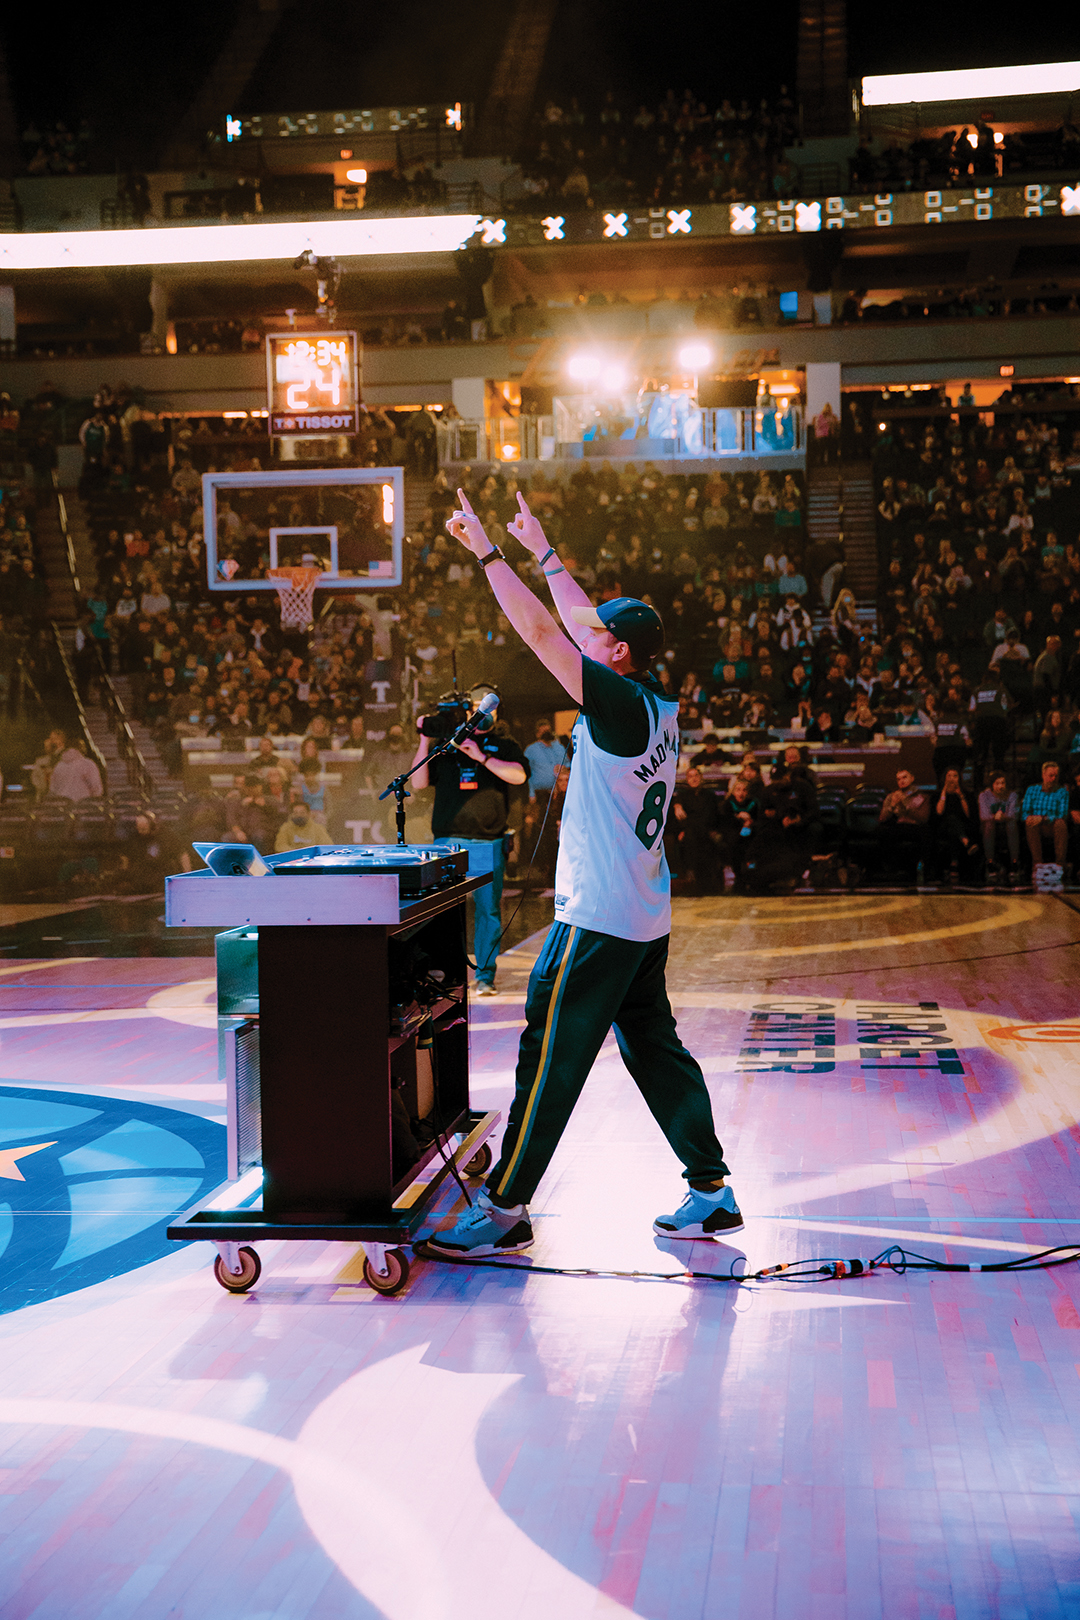 Timberwolves fans look on as DJ Mad Mardigan takes over the court for a halftime show.